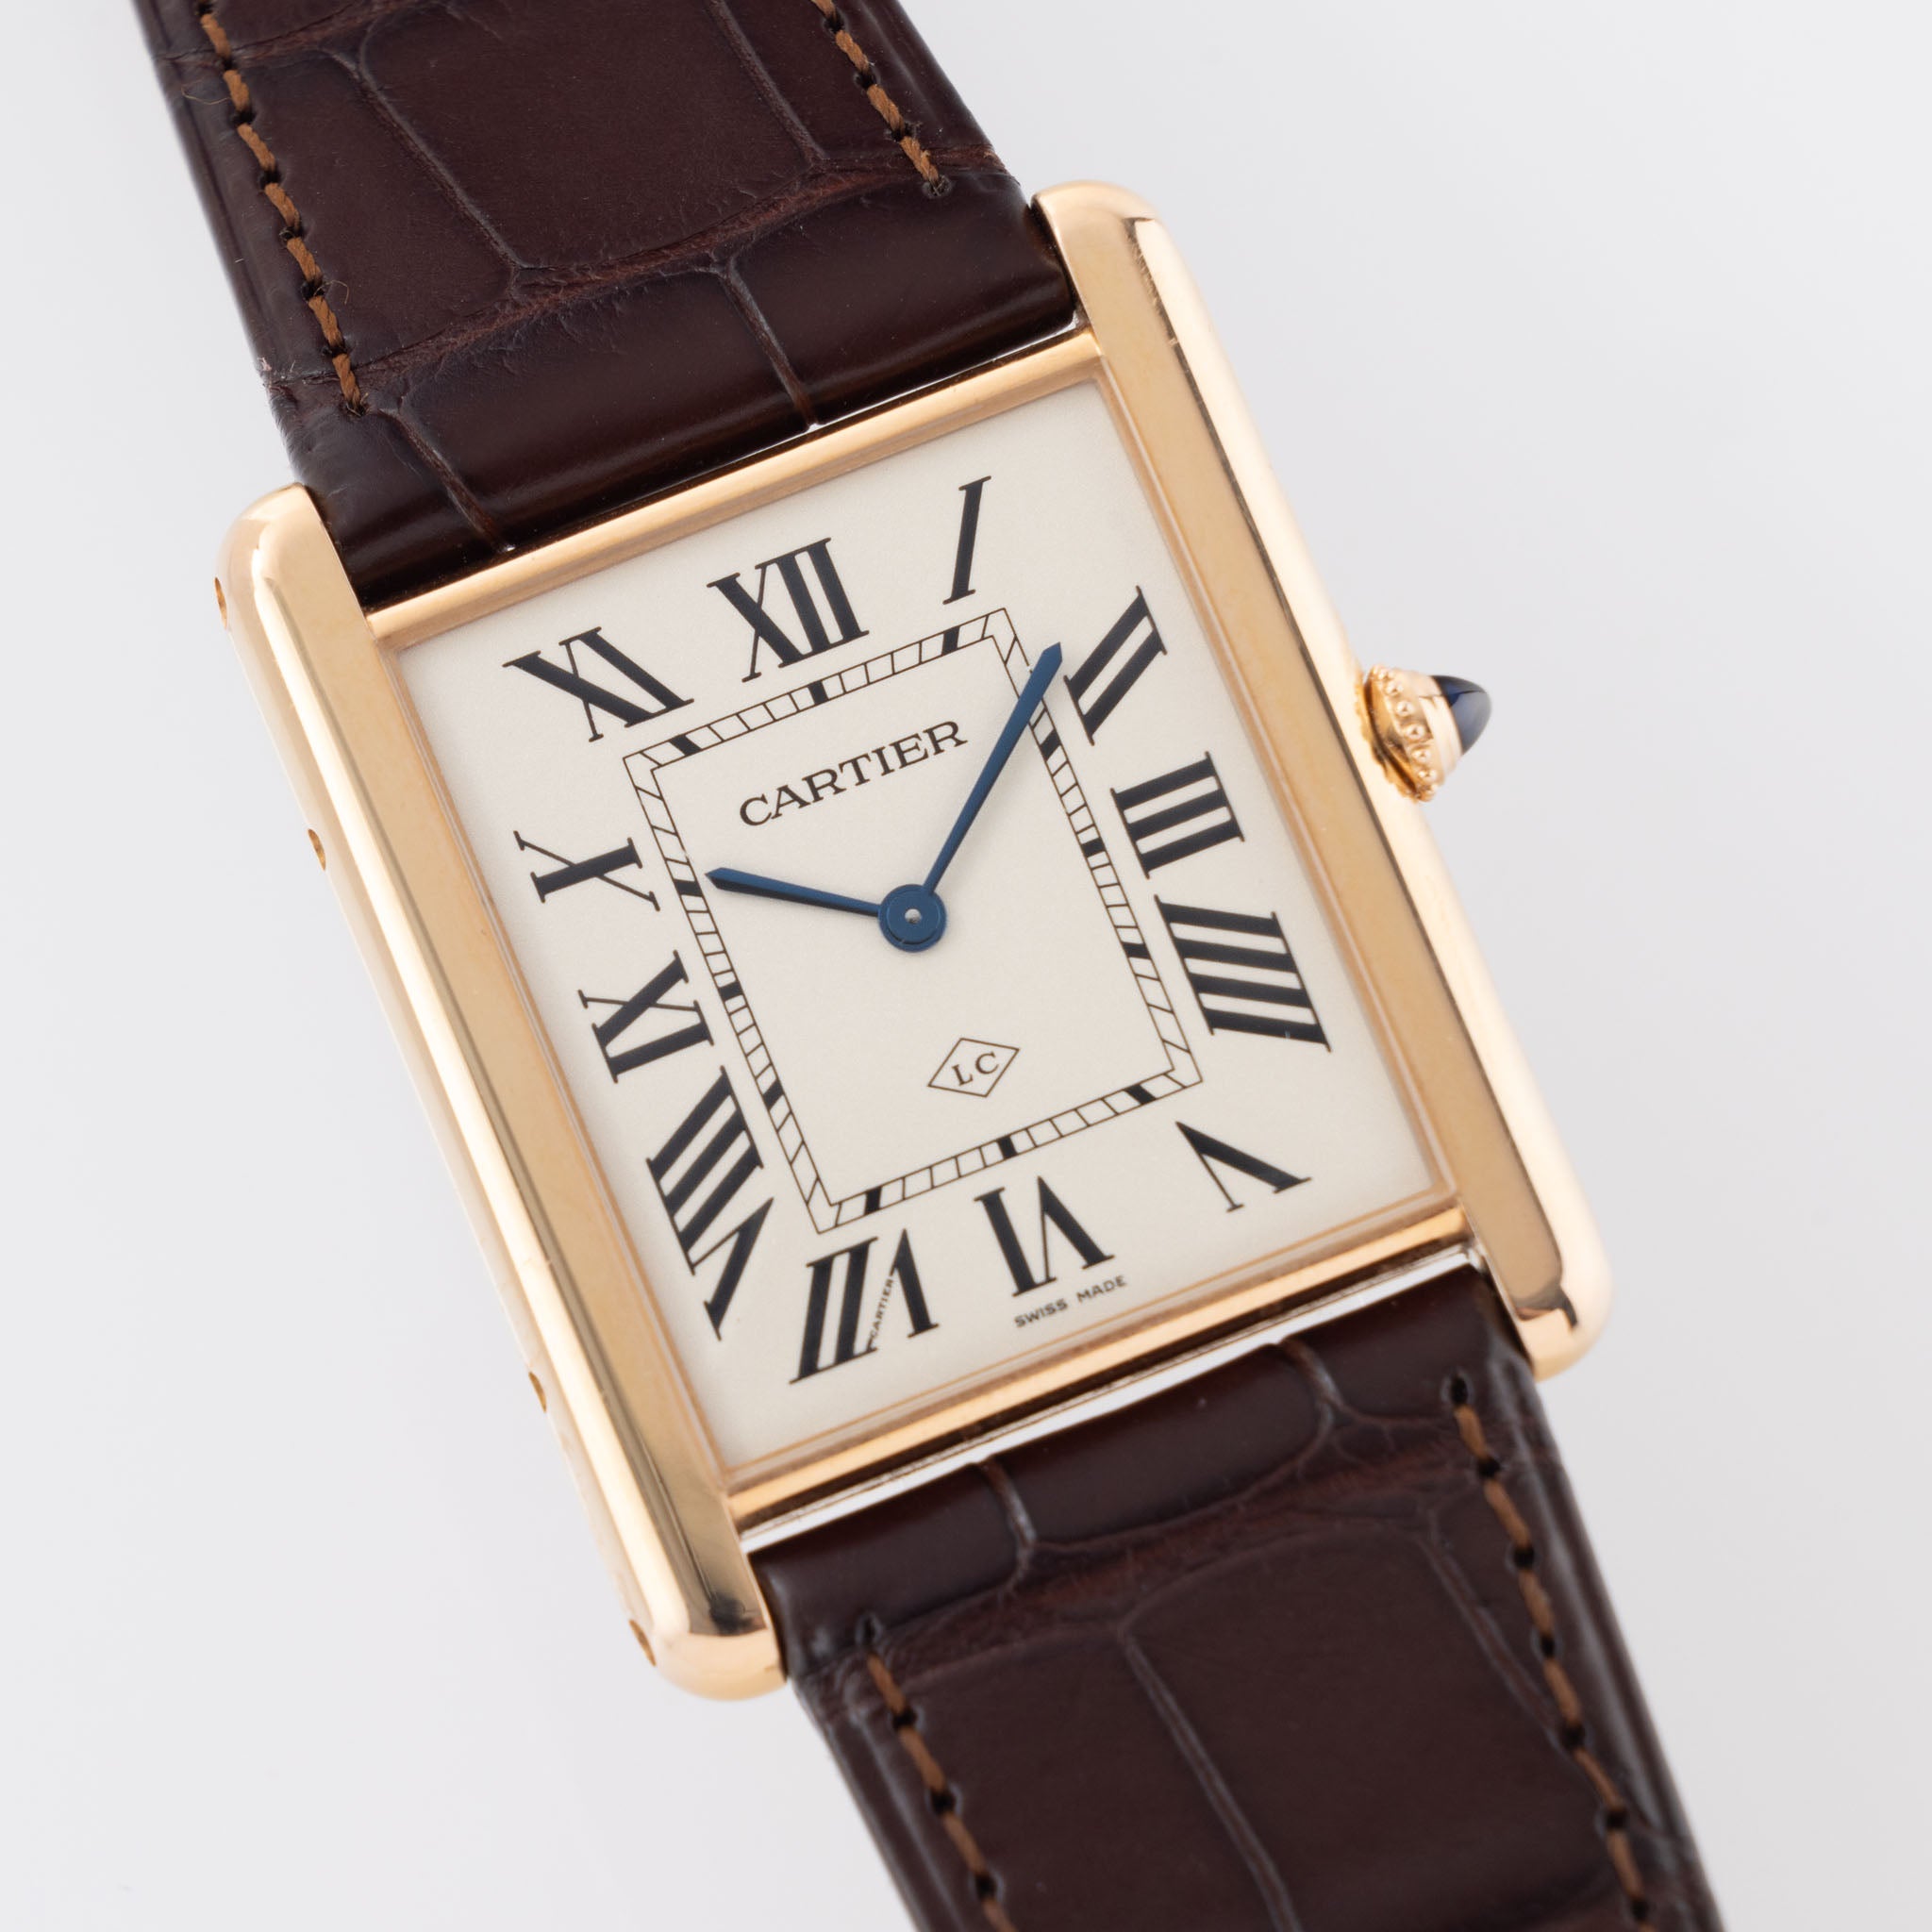 Cartier Tank Louis Collaborateur Edition XL 3280 18kt Rose Gold Box and Papers